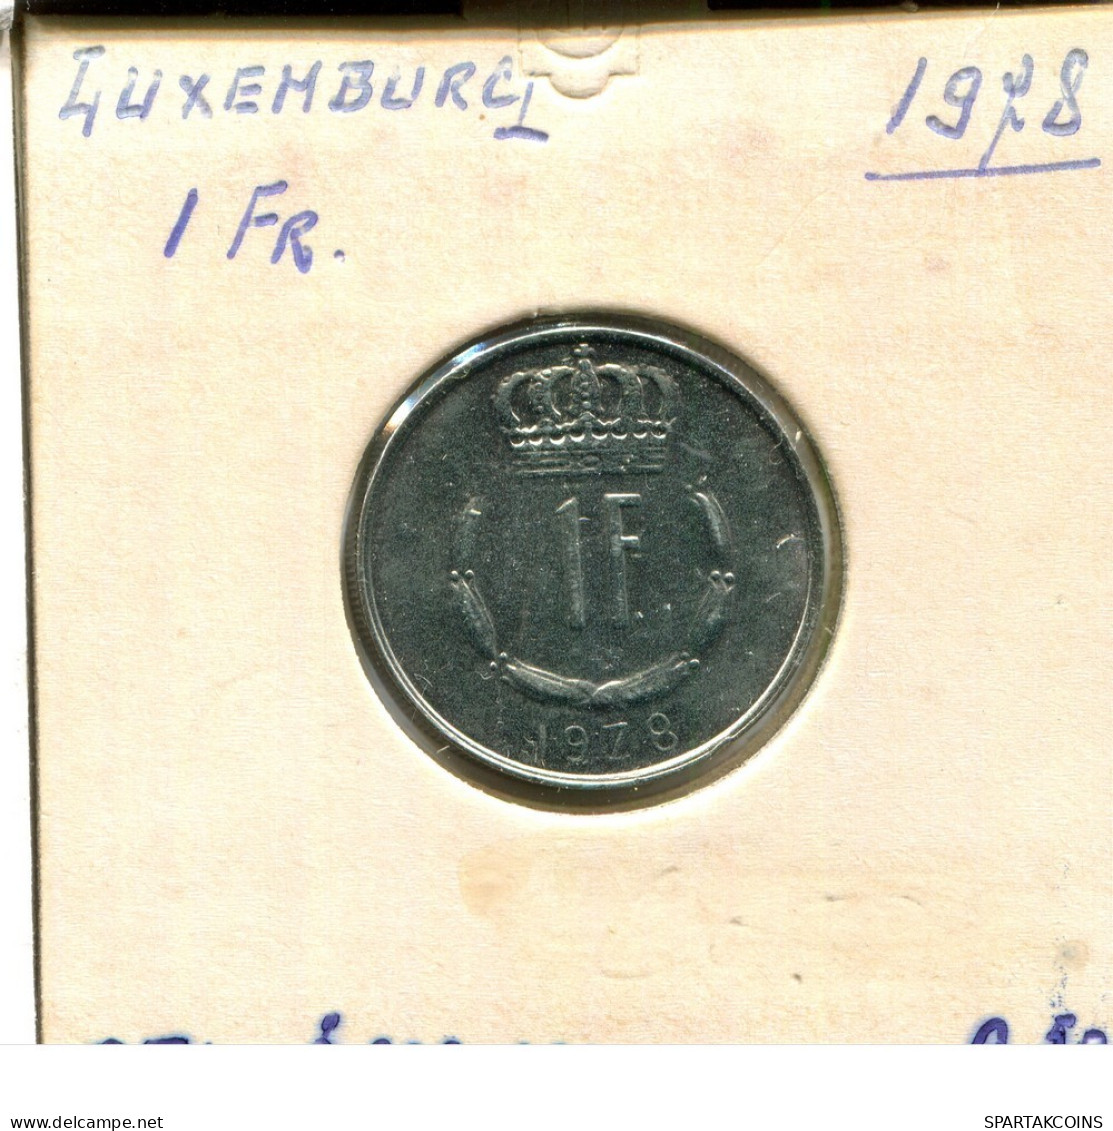 1 FRANC 1978 LUXEMBURG LUXEMBOURG Münze #AT214.D.A - Luxembourg